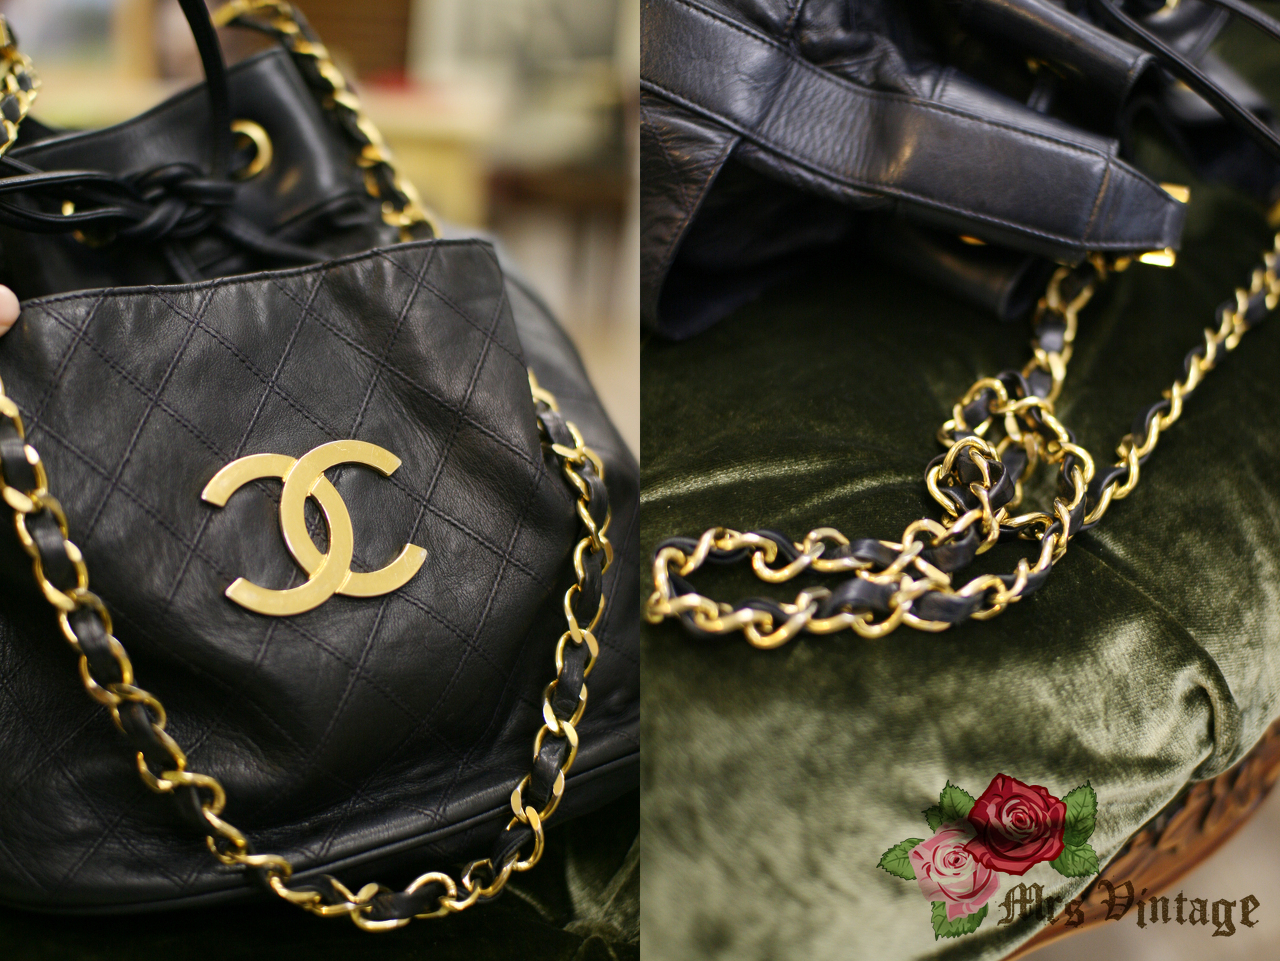 Vintage Chanel Small Lambskin Quilted Leather Bucket Bag with 2